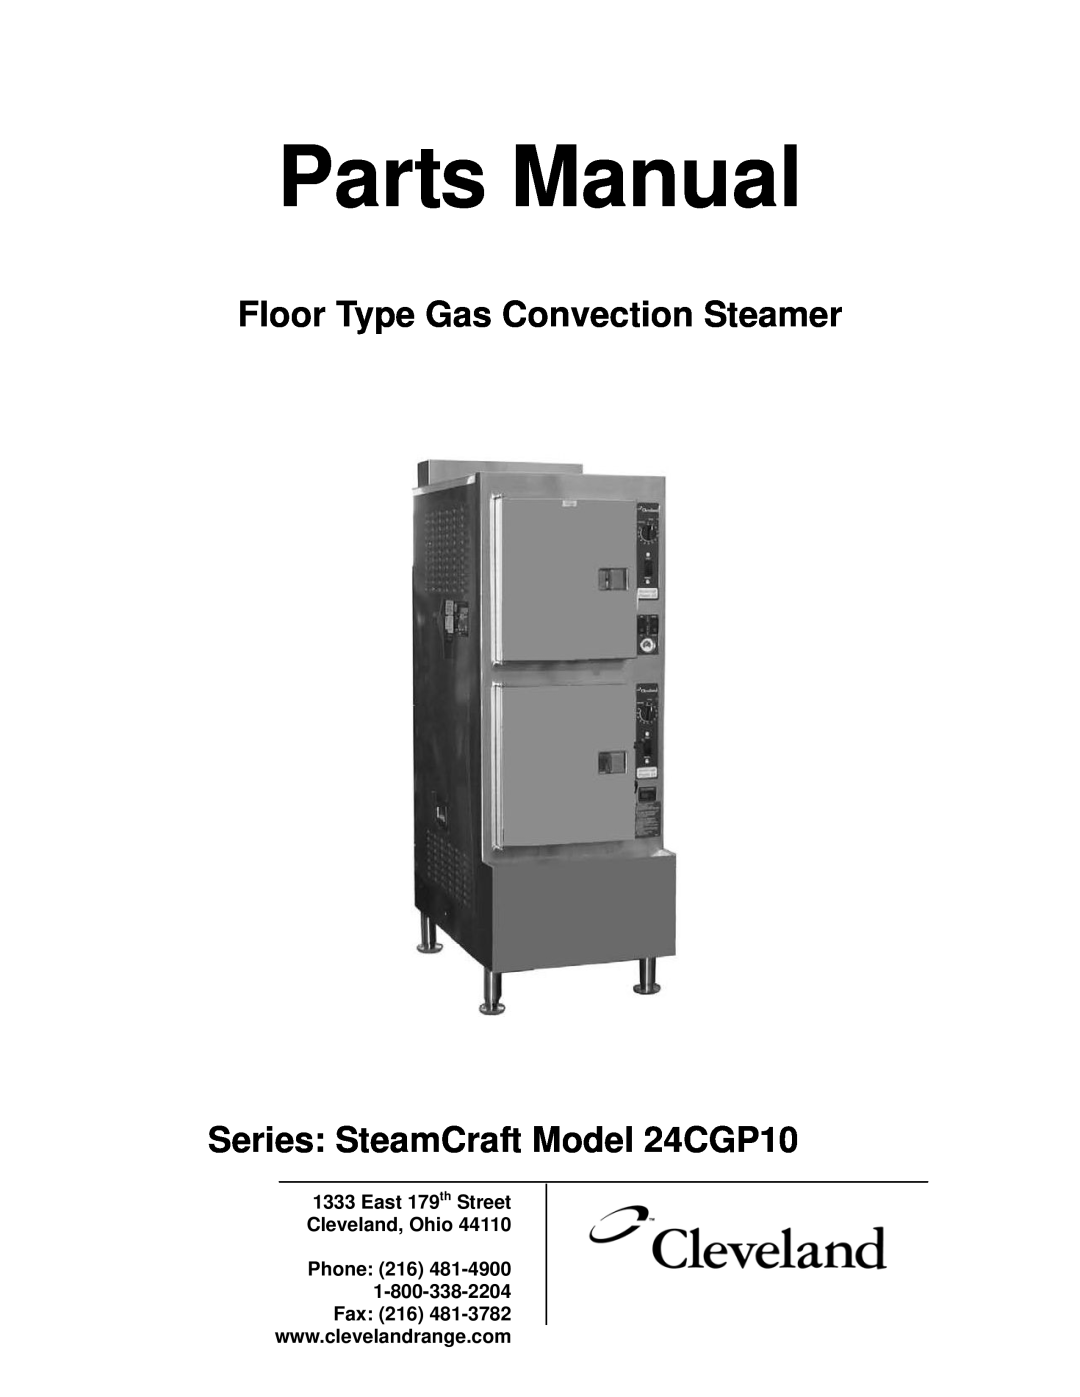 Cleveland Range 24-CGP-10 manual Parts Manual, Floor Type Gas Convection Steamer, Series SteamCraft Model 24CGP10 